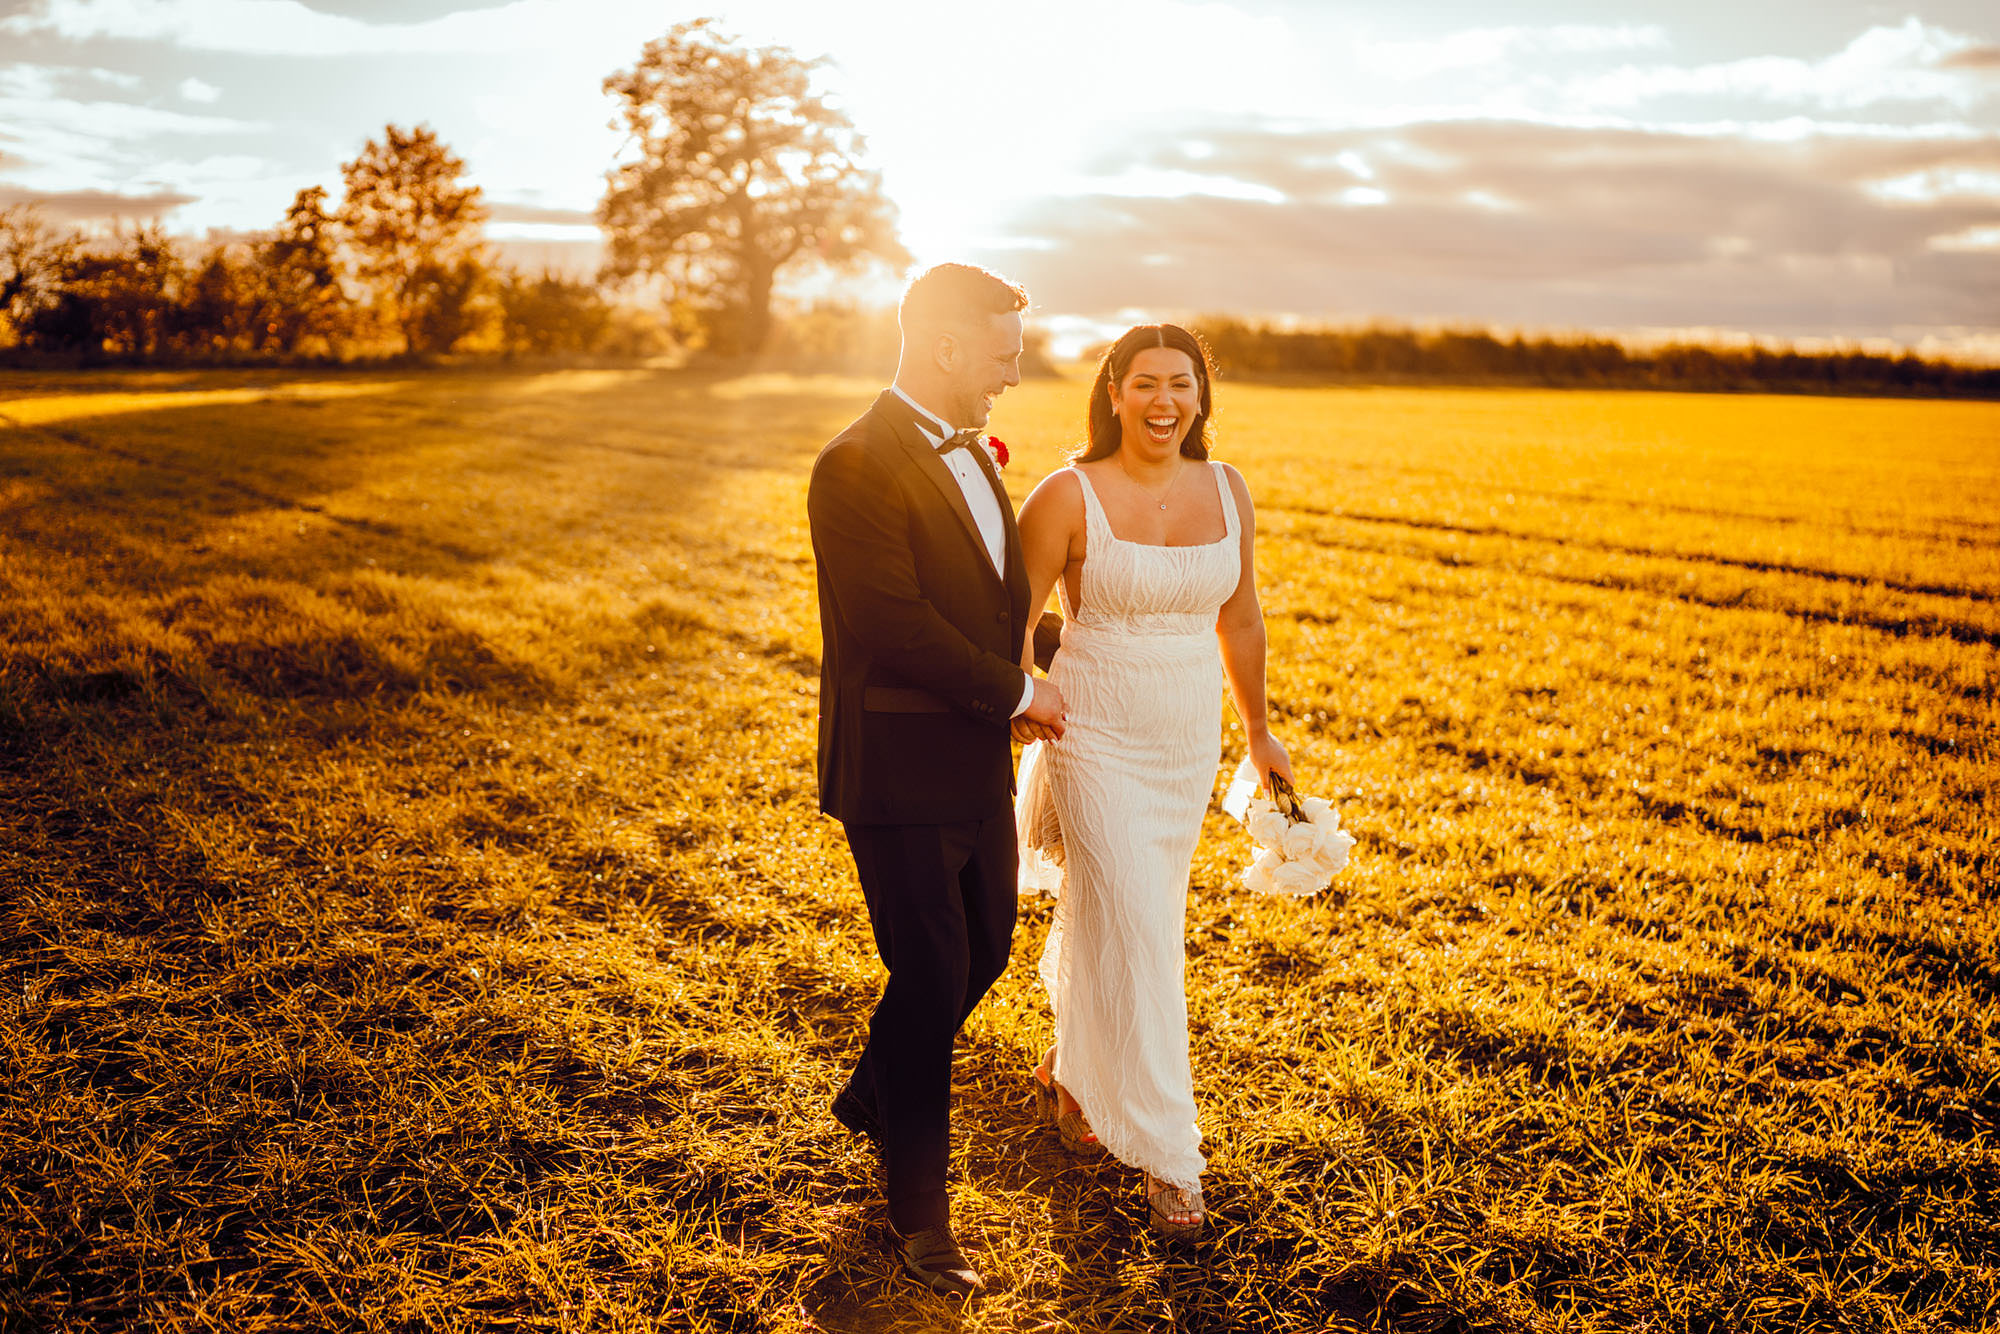 The Normans colourful wedding photography hamish irvine 